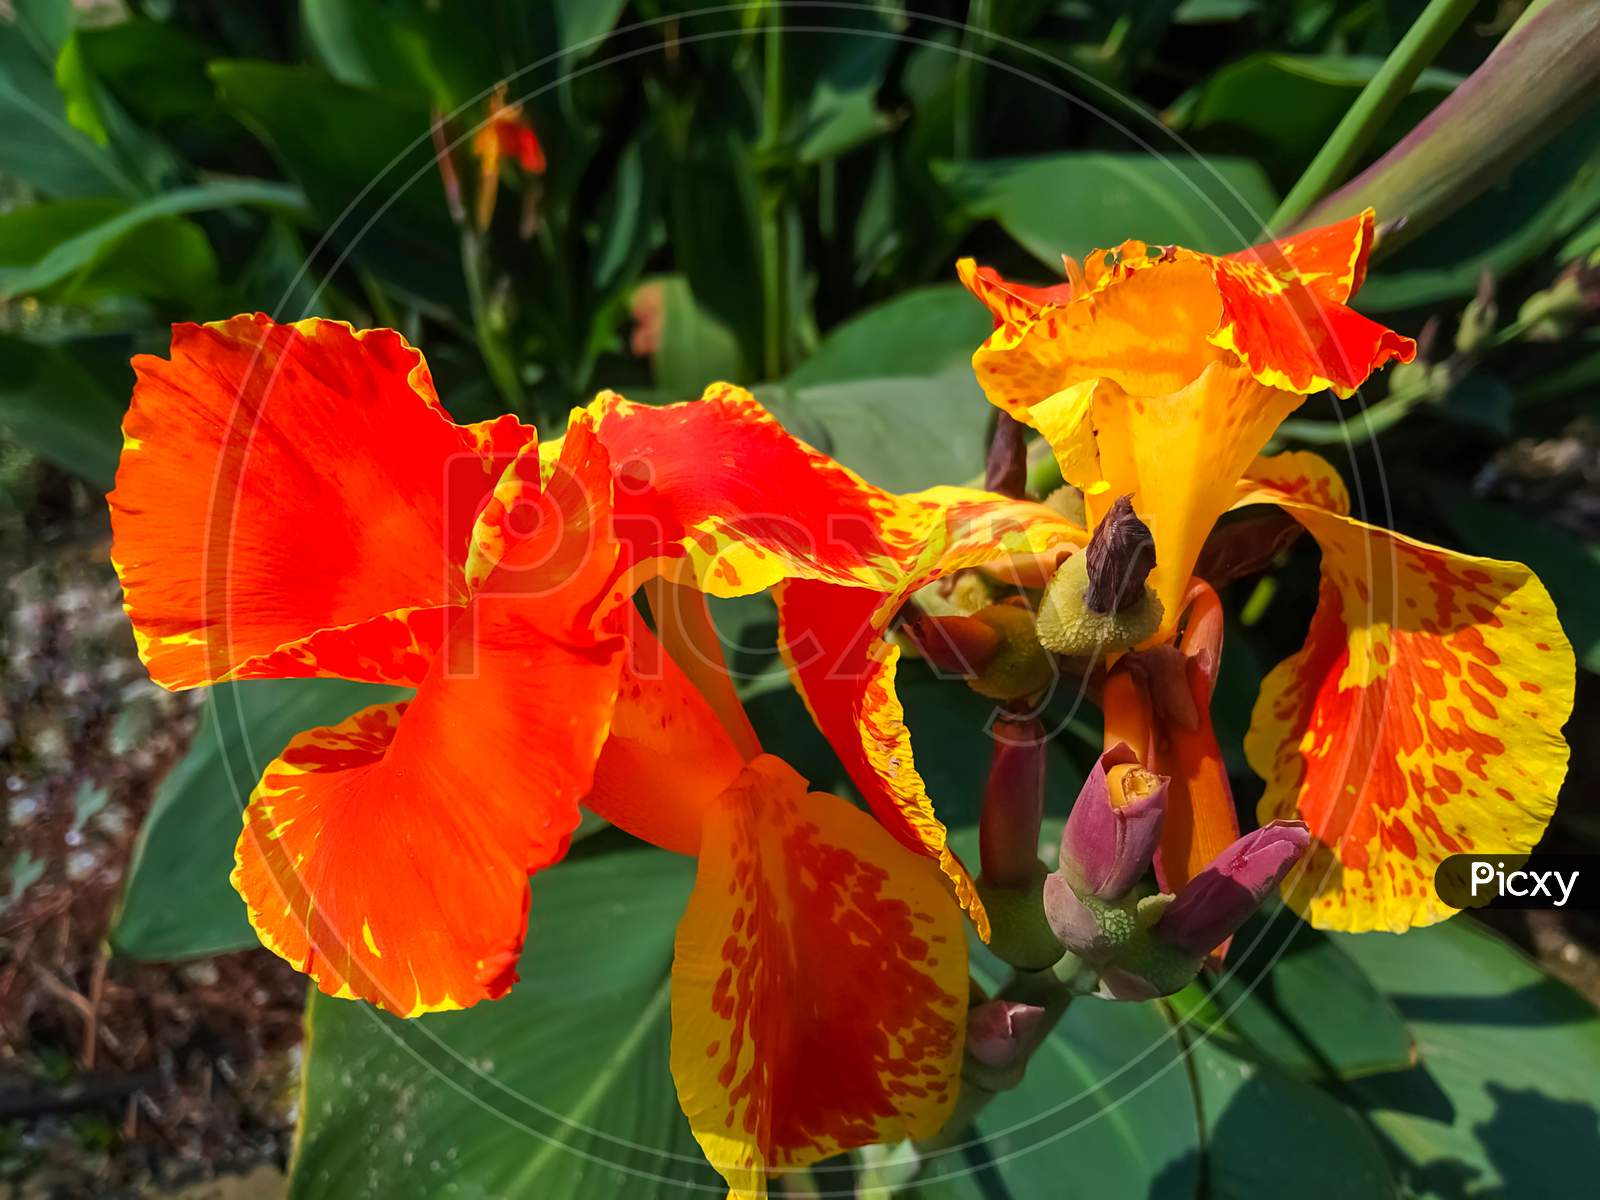 Indian canna lily flower